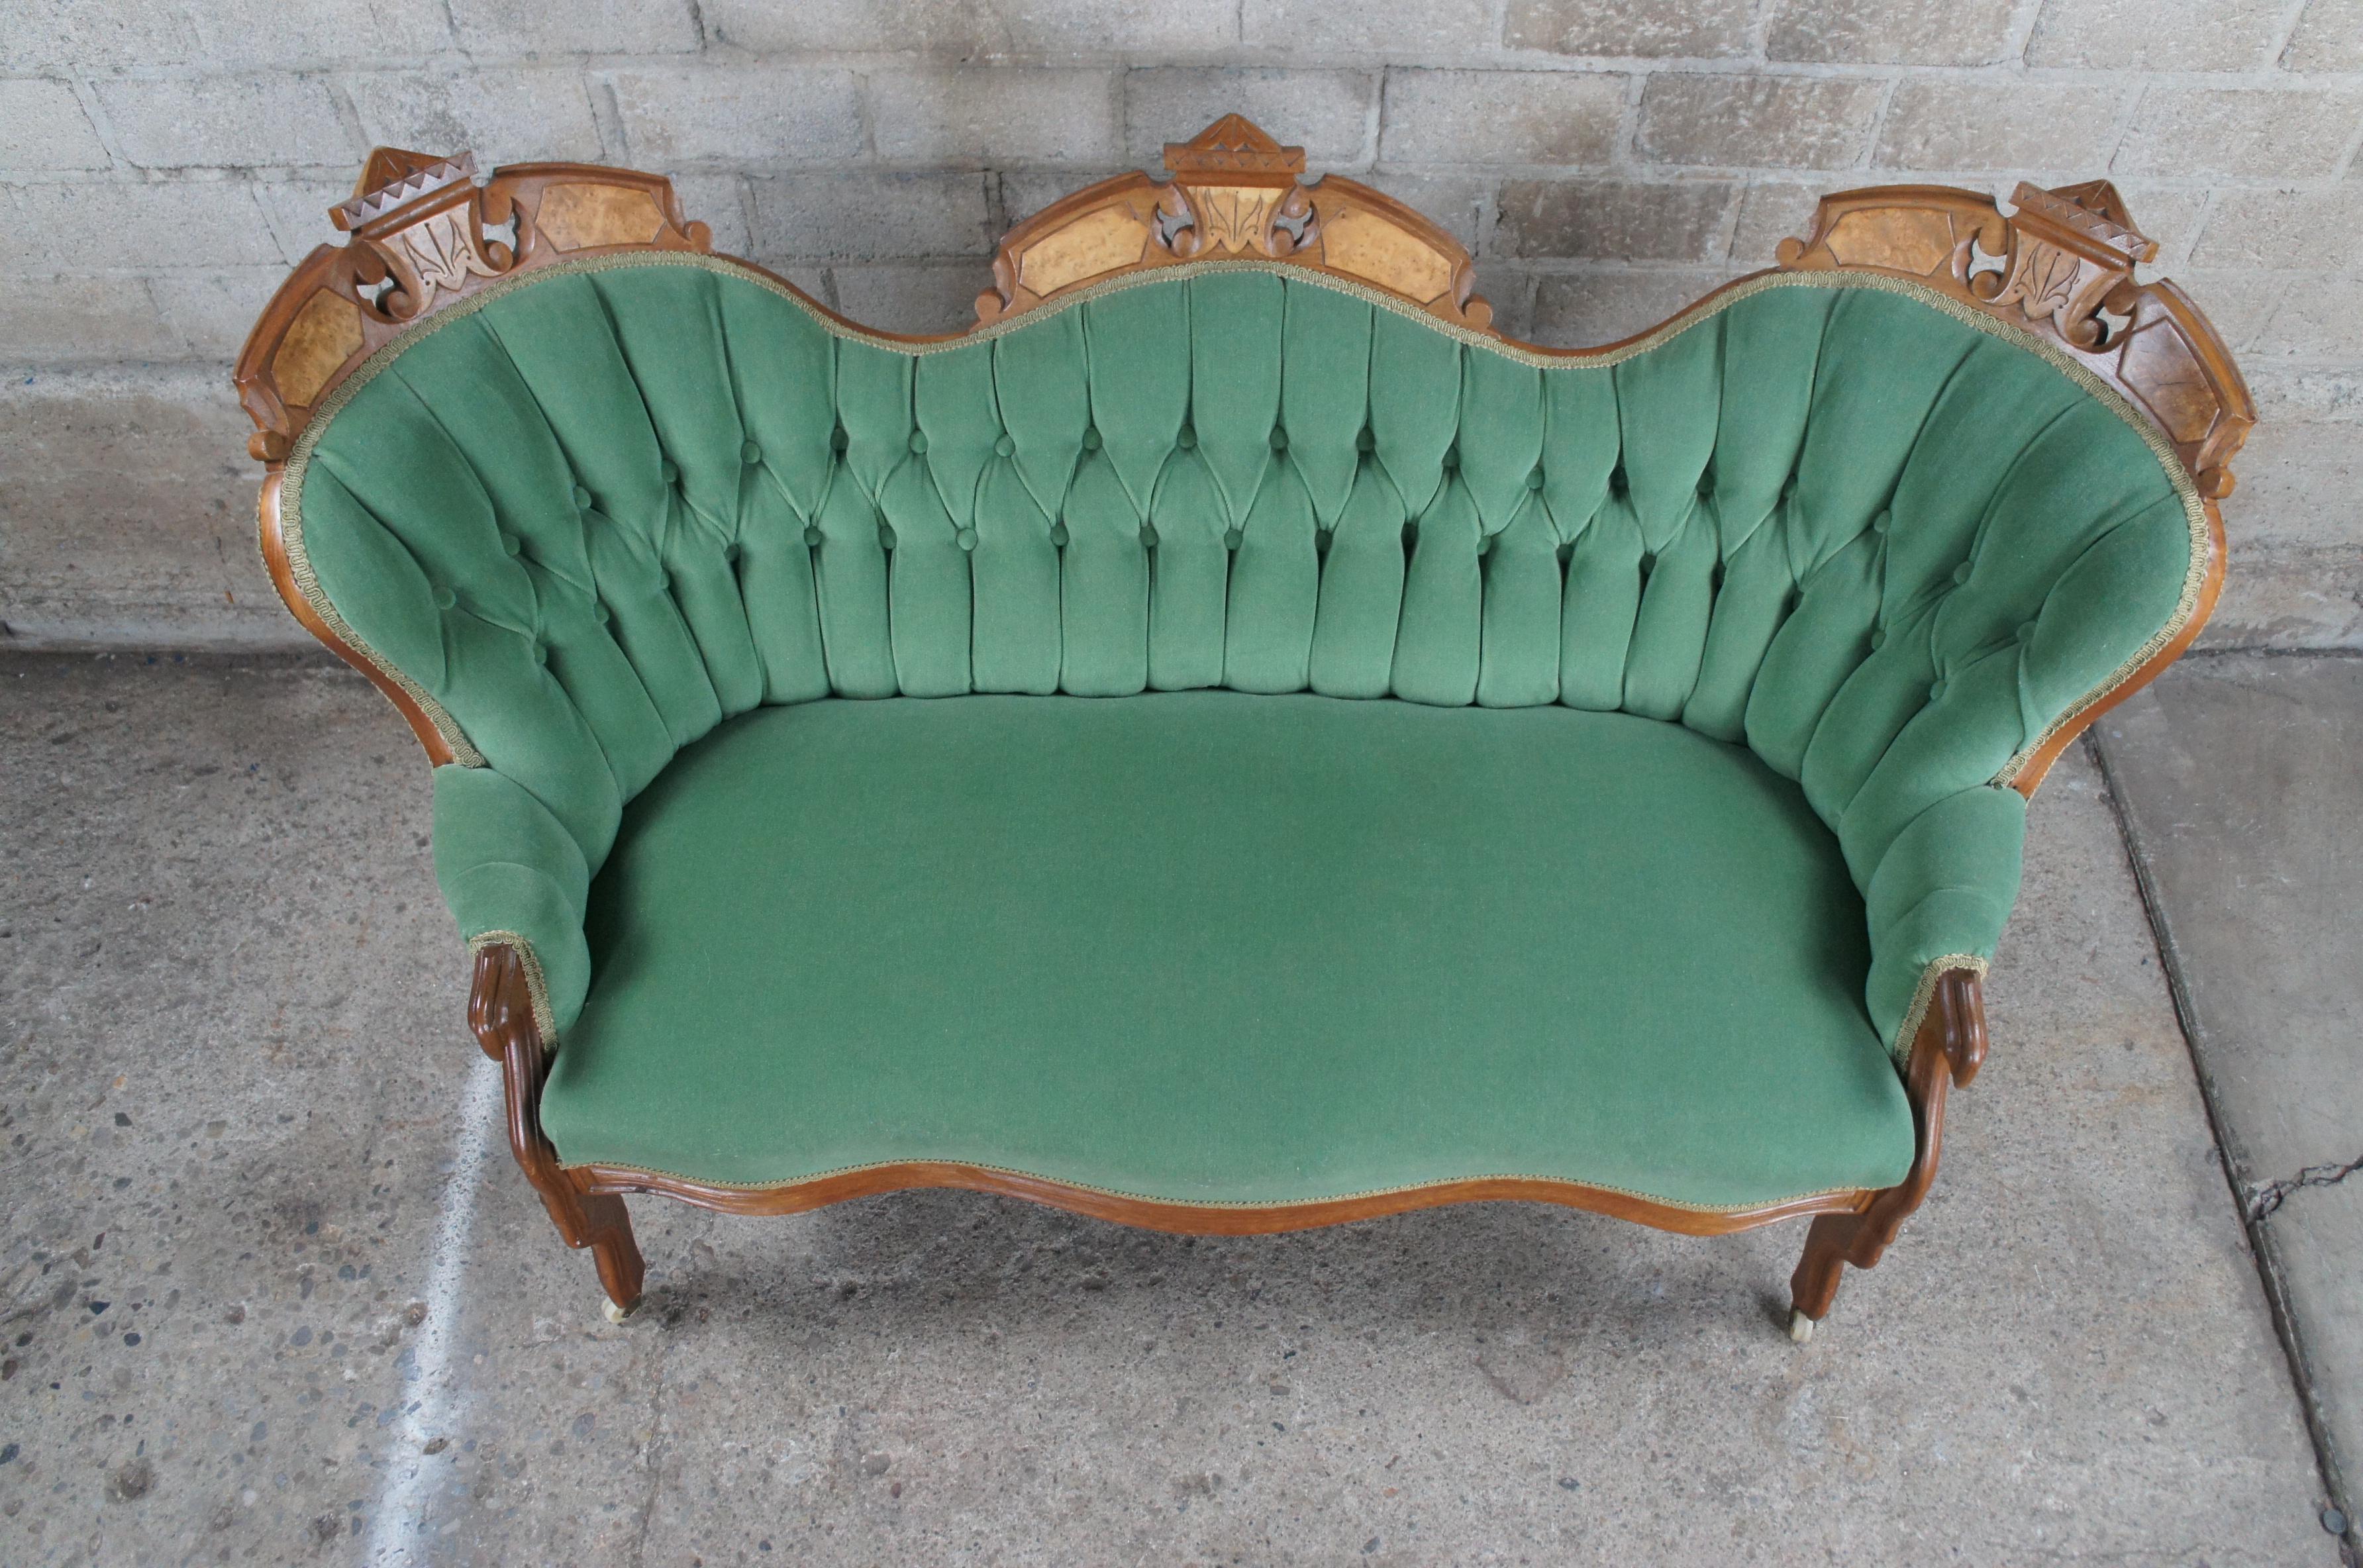 Antique Victorian Renaissance Revival Walnut Burl Parlor Tufted Settee Loveseat In Good Condition For Sale In Dayton, OH